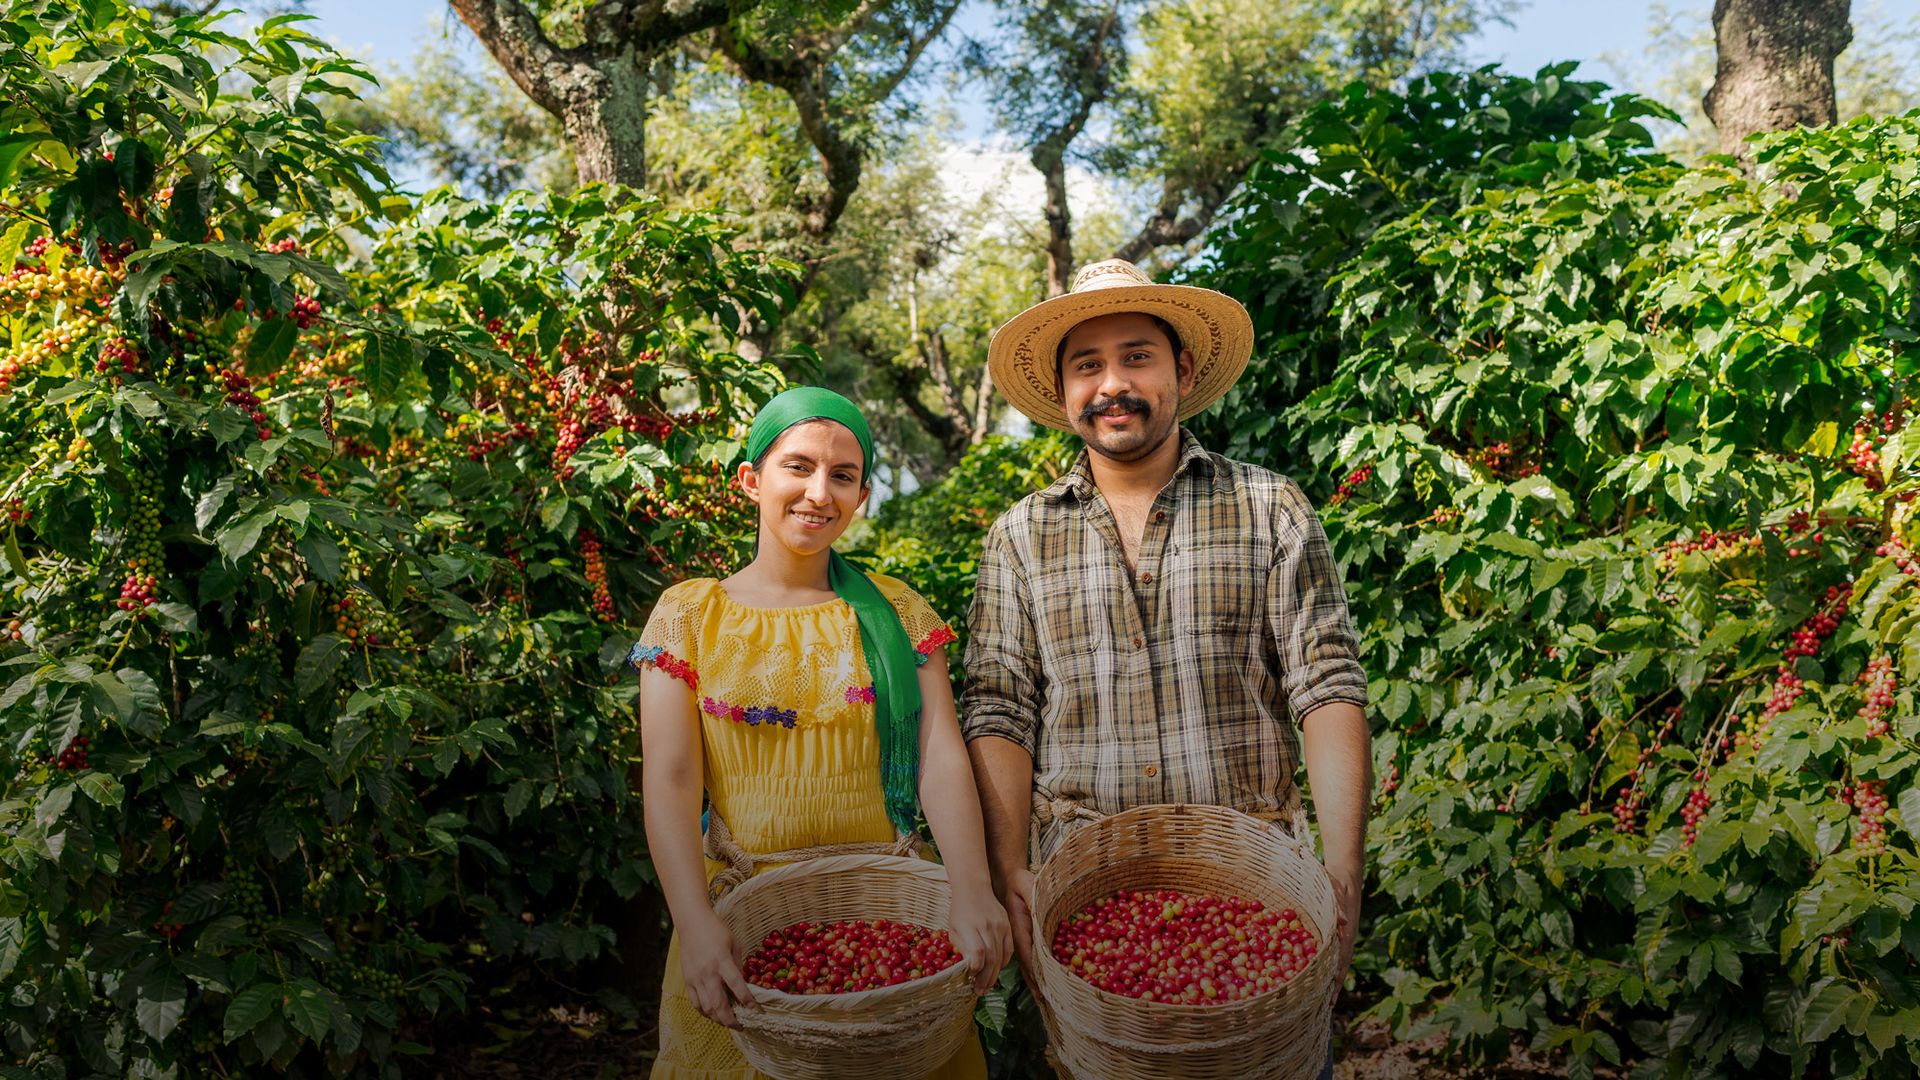 Image of two farm workers holding baskets of harvested fruit